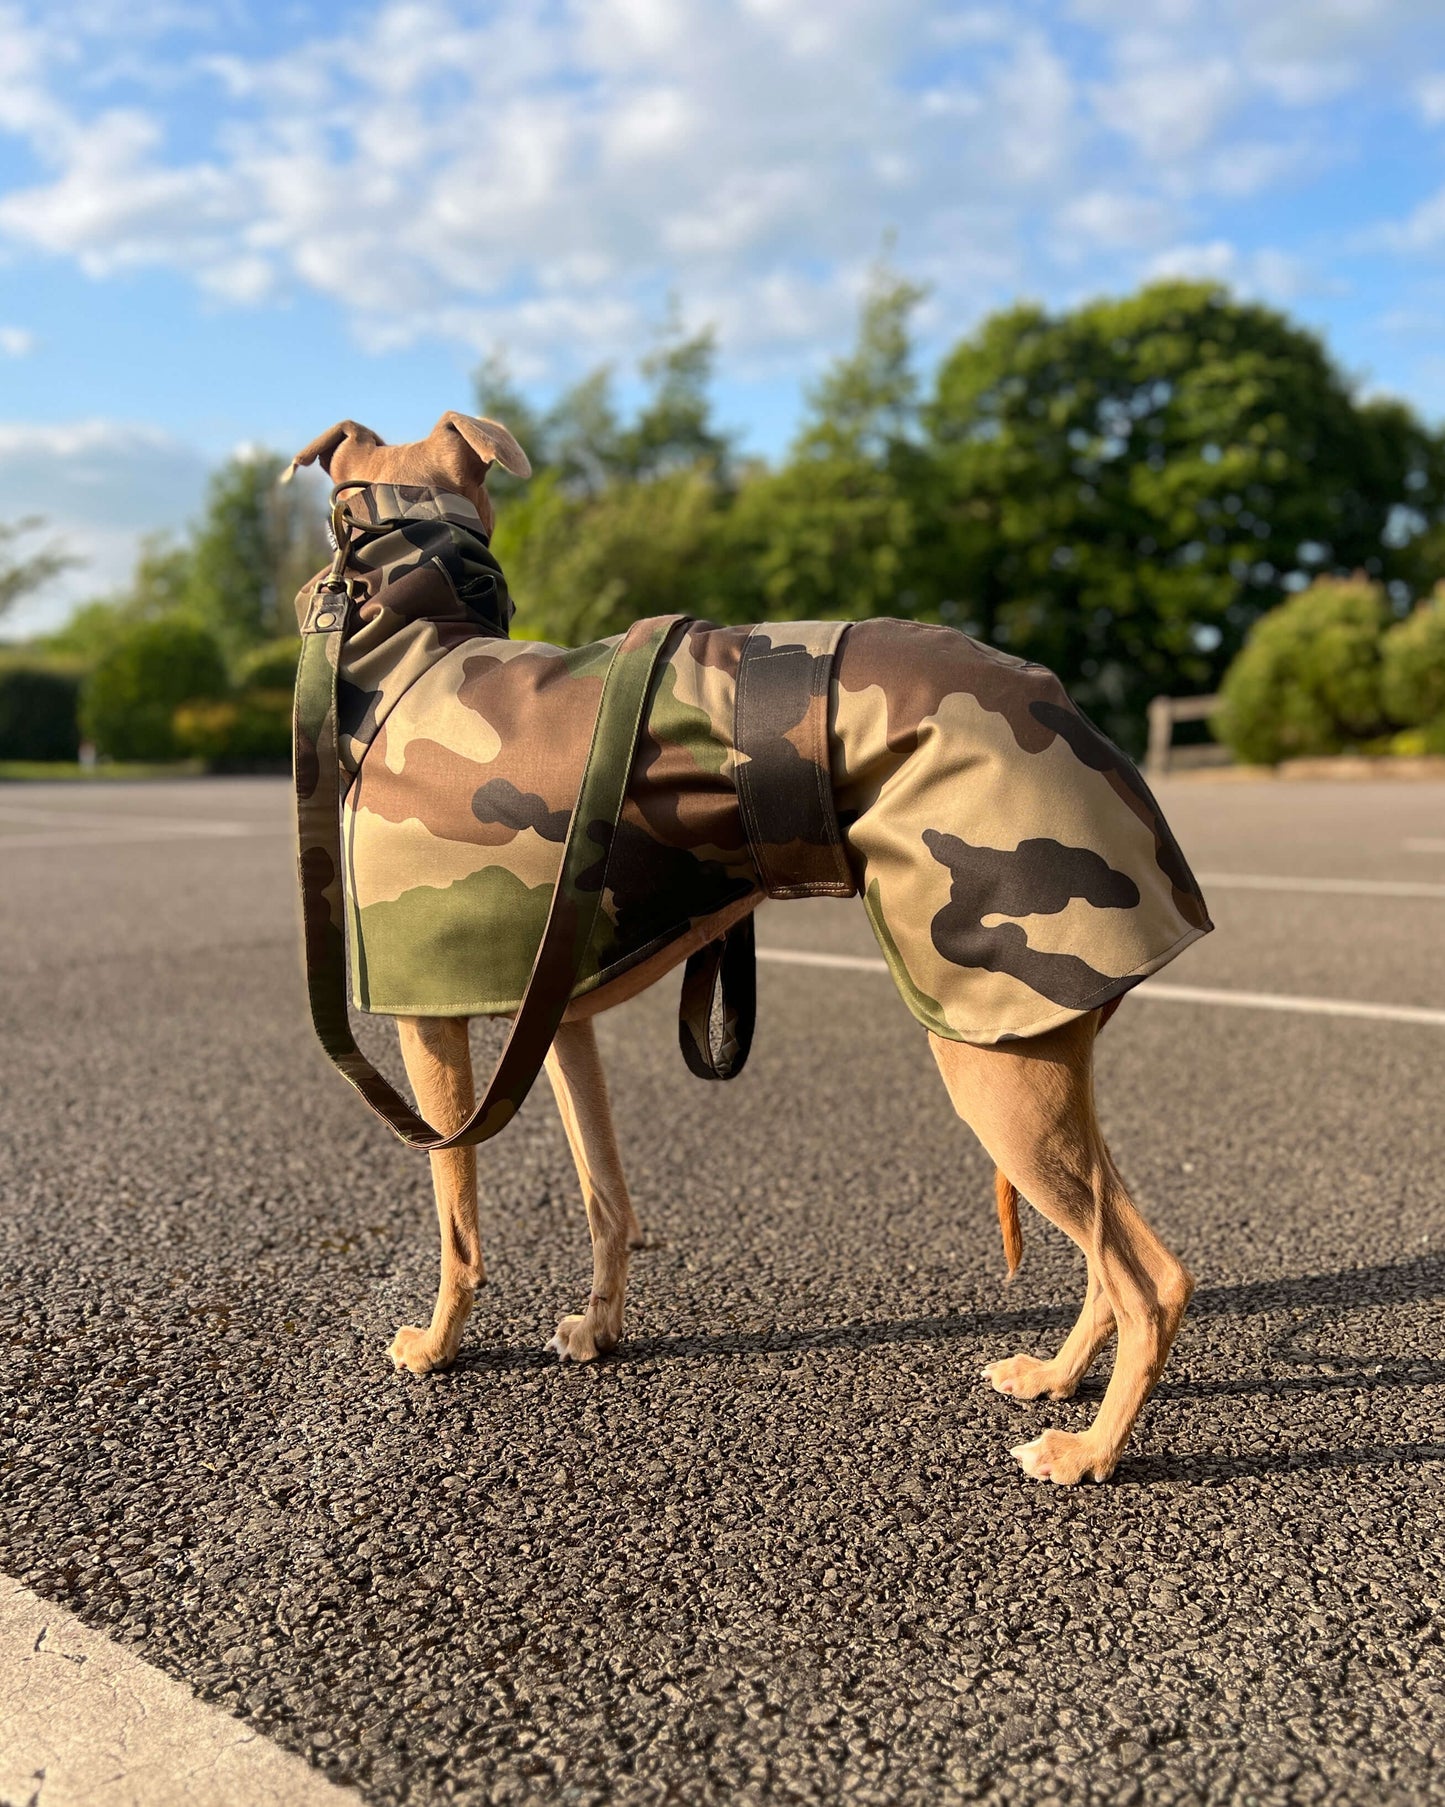 THE DINO Lightweight Camouflage, Water Resistant Raincoat - Greyhound Sizes